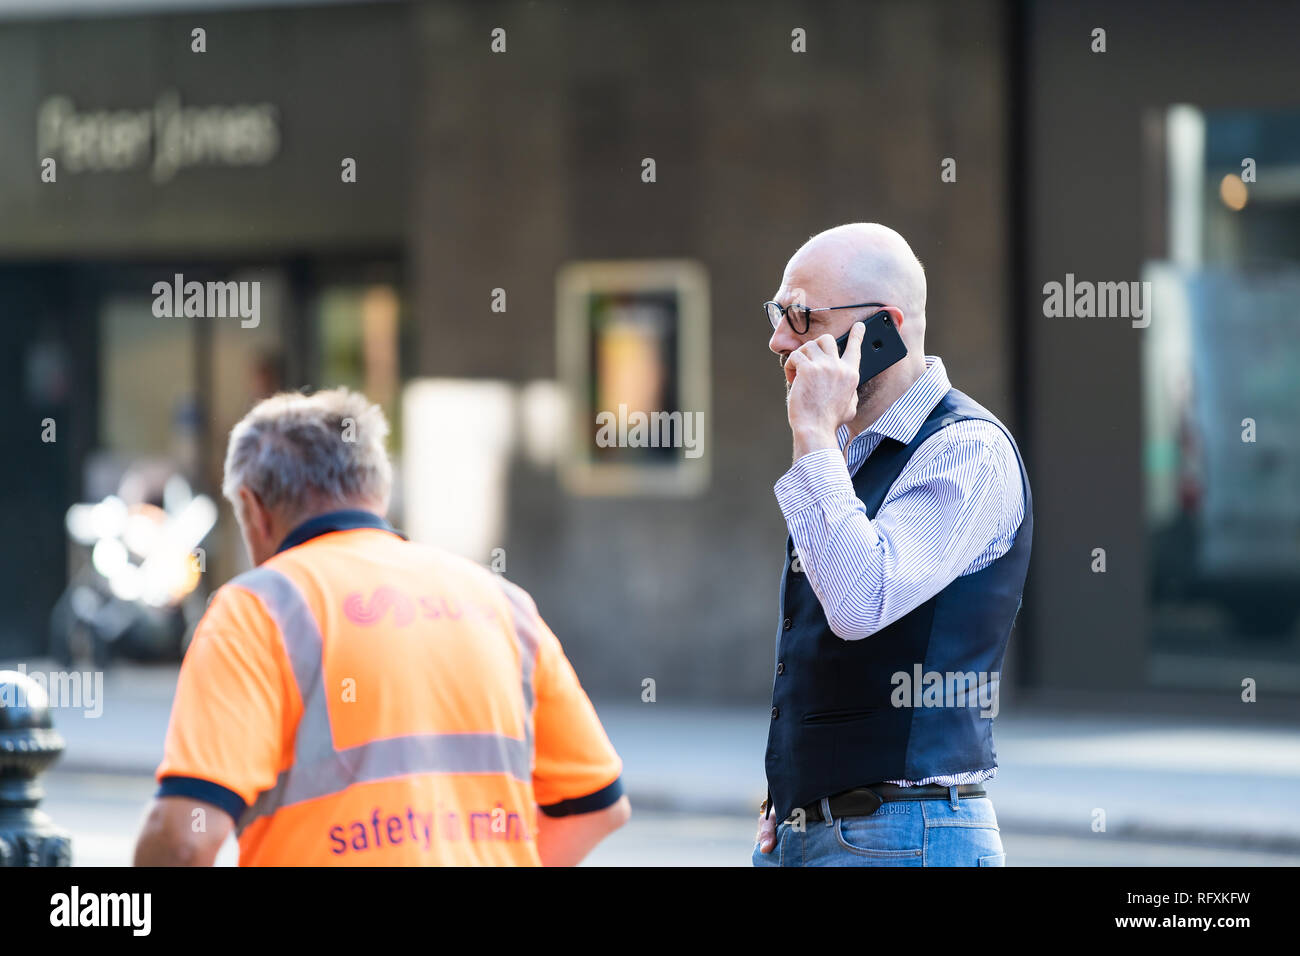 London, UK - September 13, 2018: Business man talking on phone by worker in Chelsea with background of road street Stock Photo